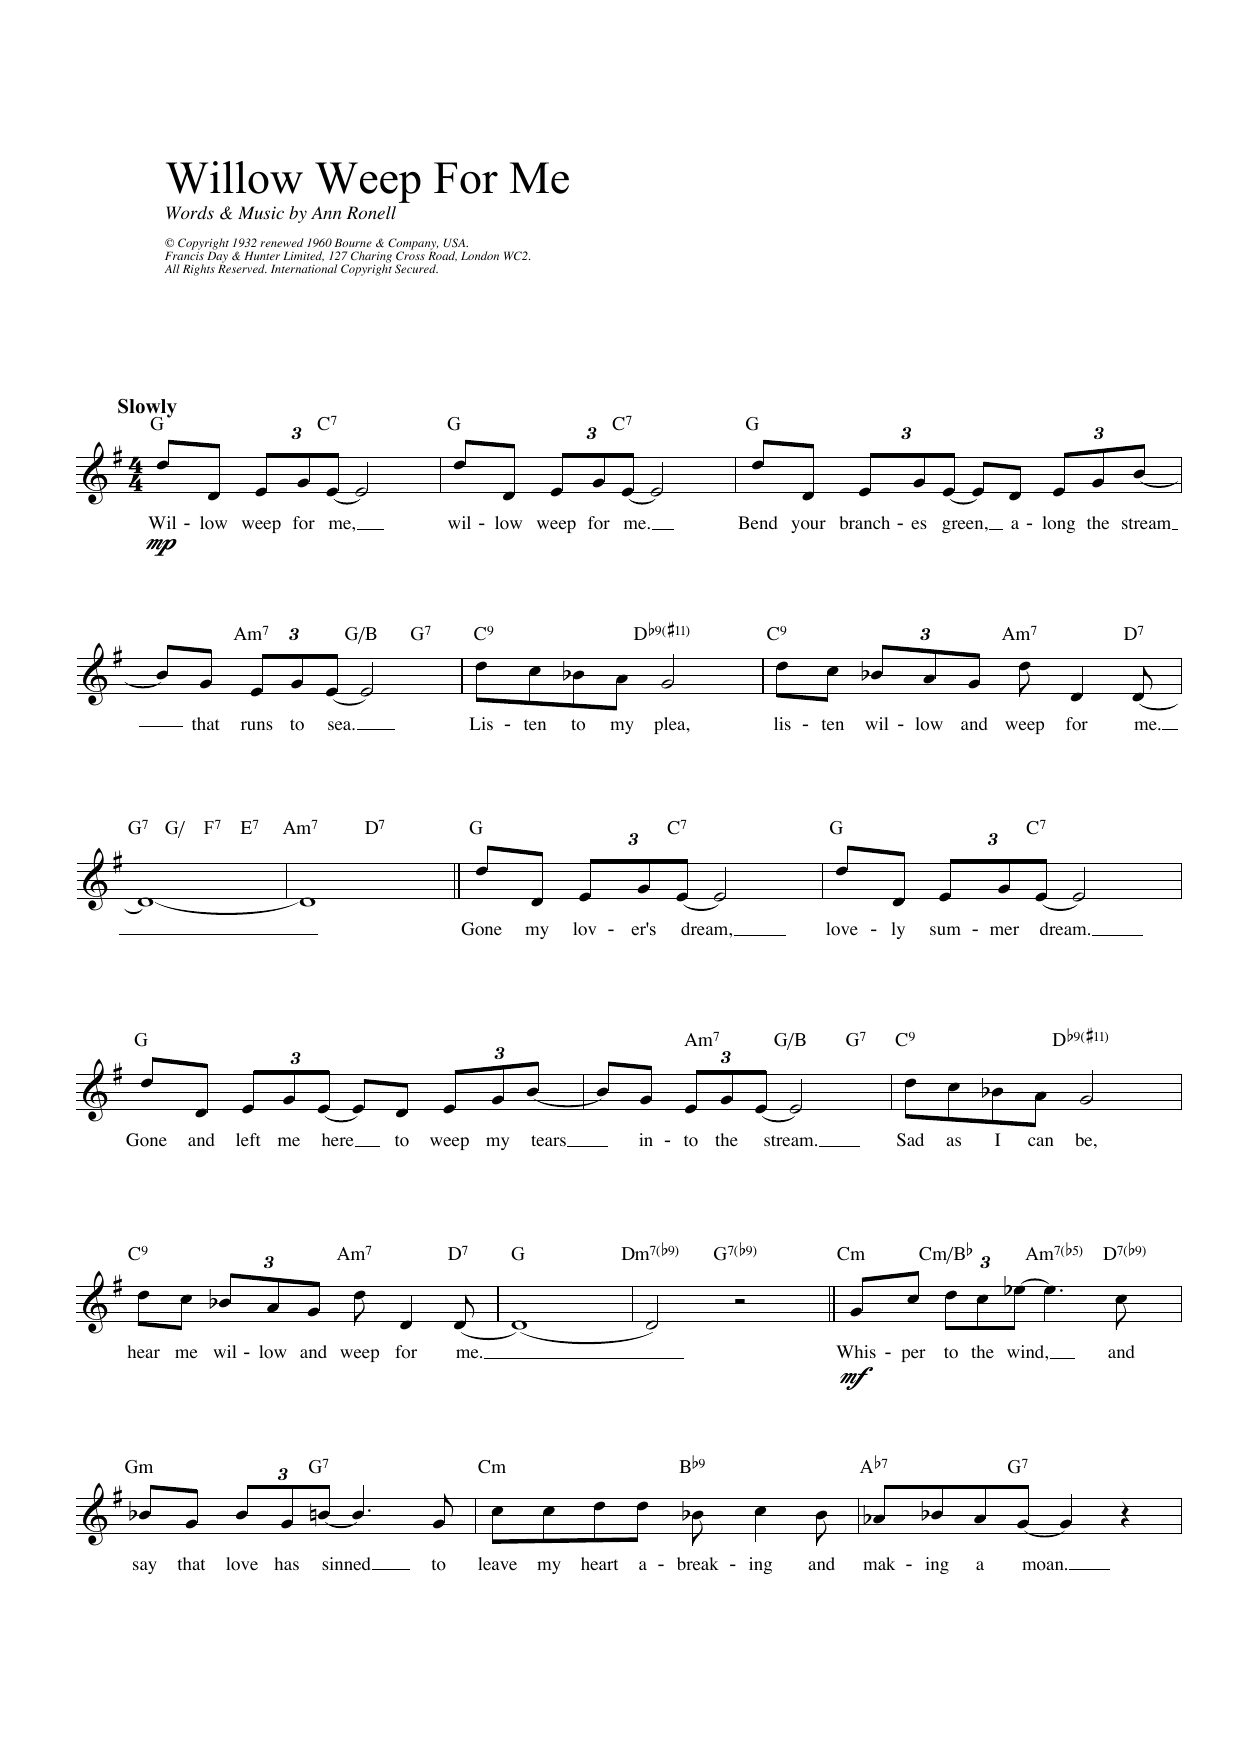 Download Ann Ronell Willow Weep For Me Sheet Music